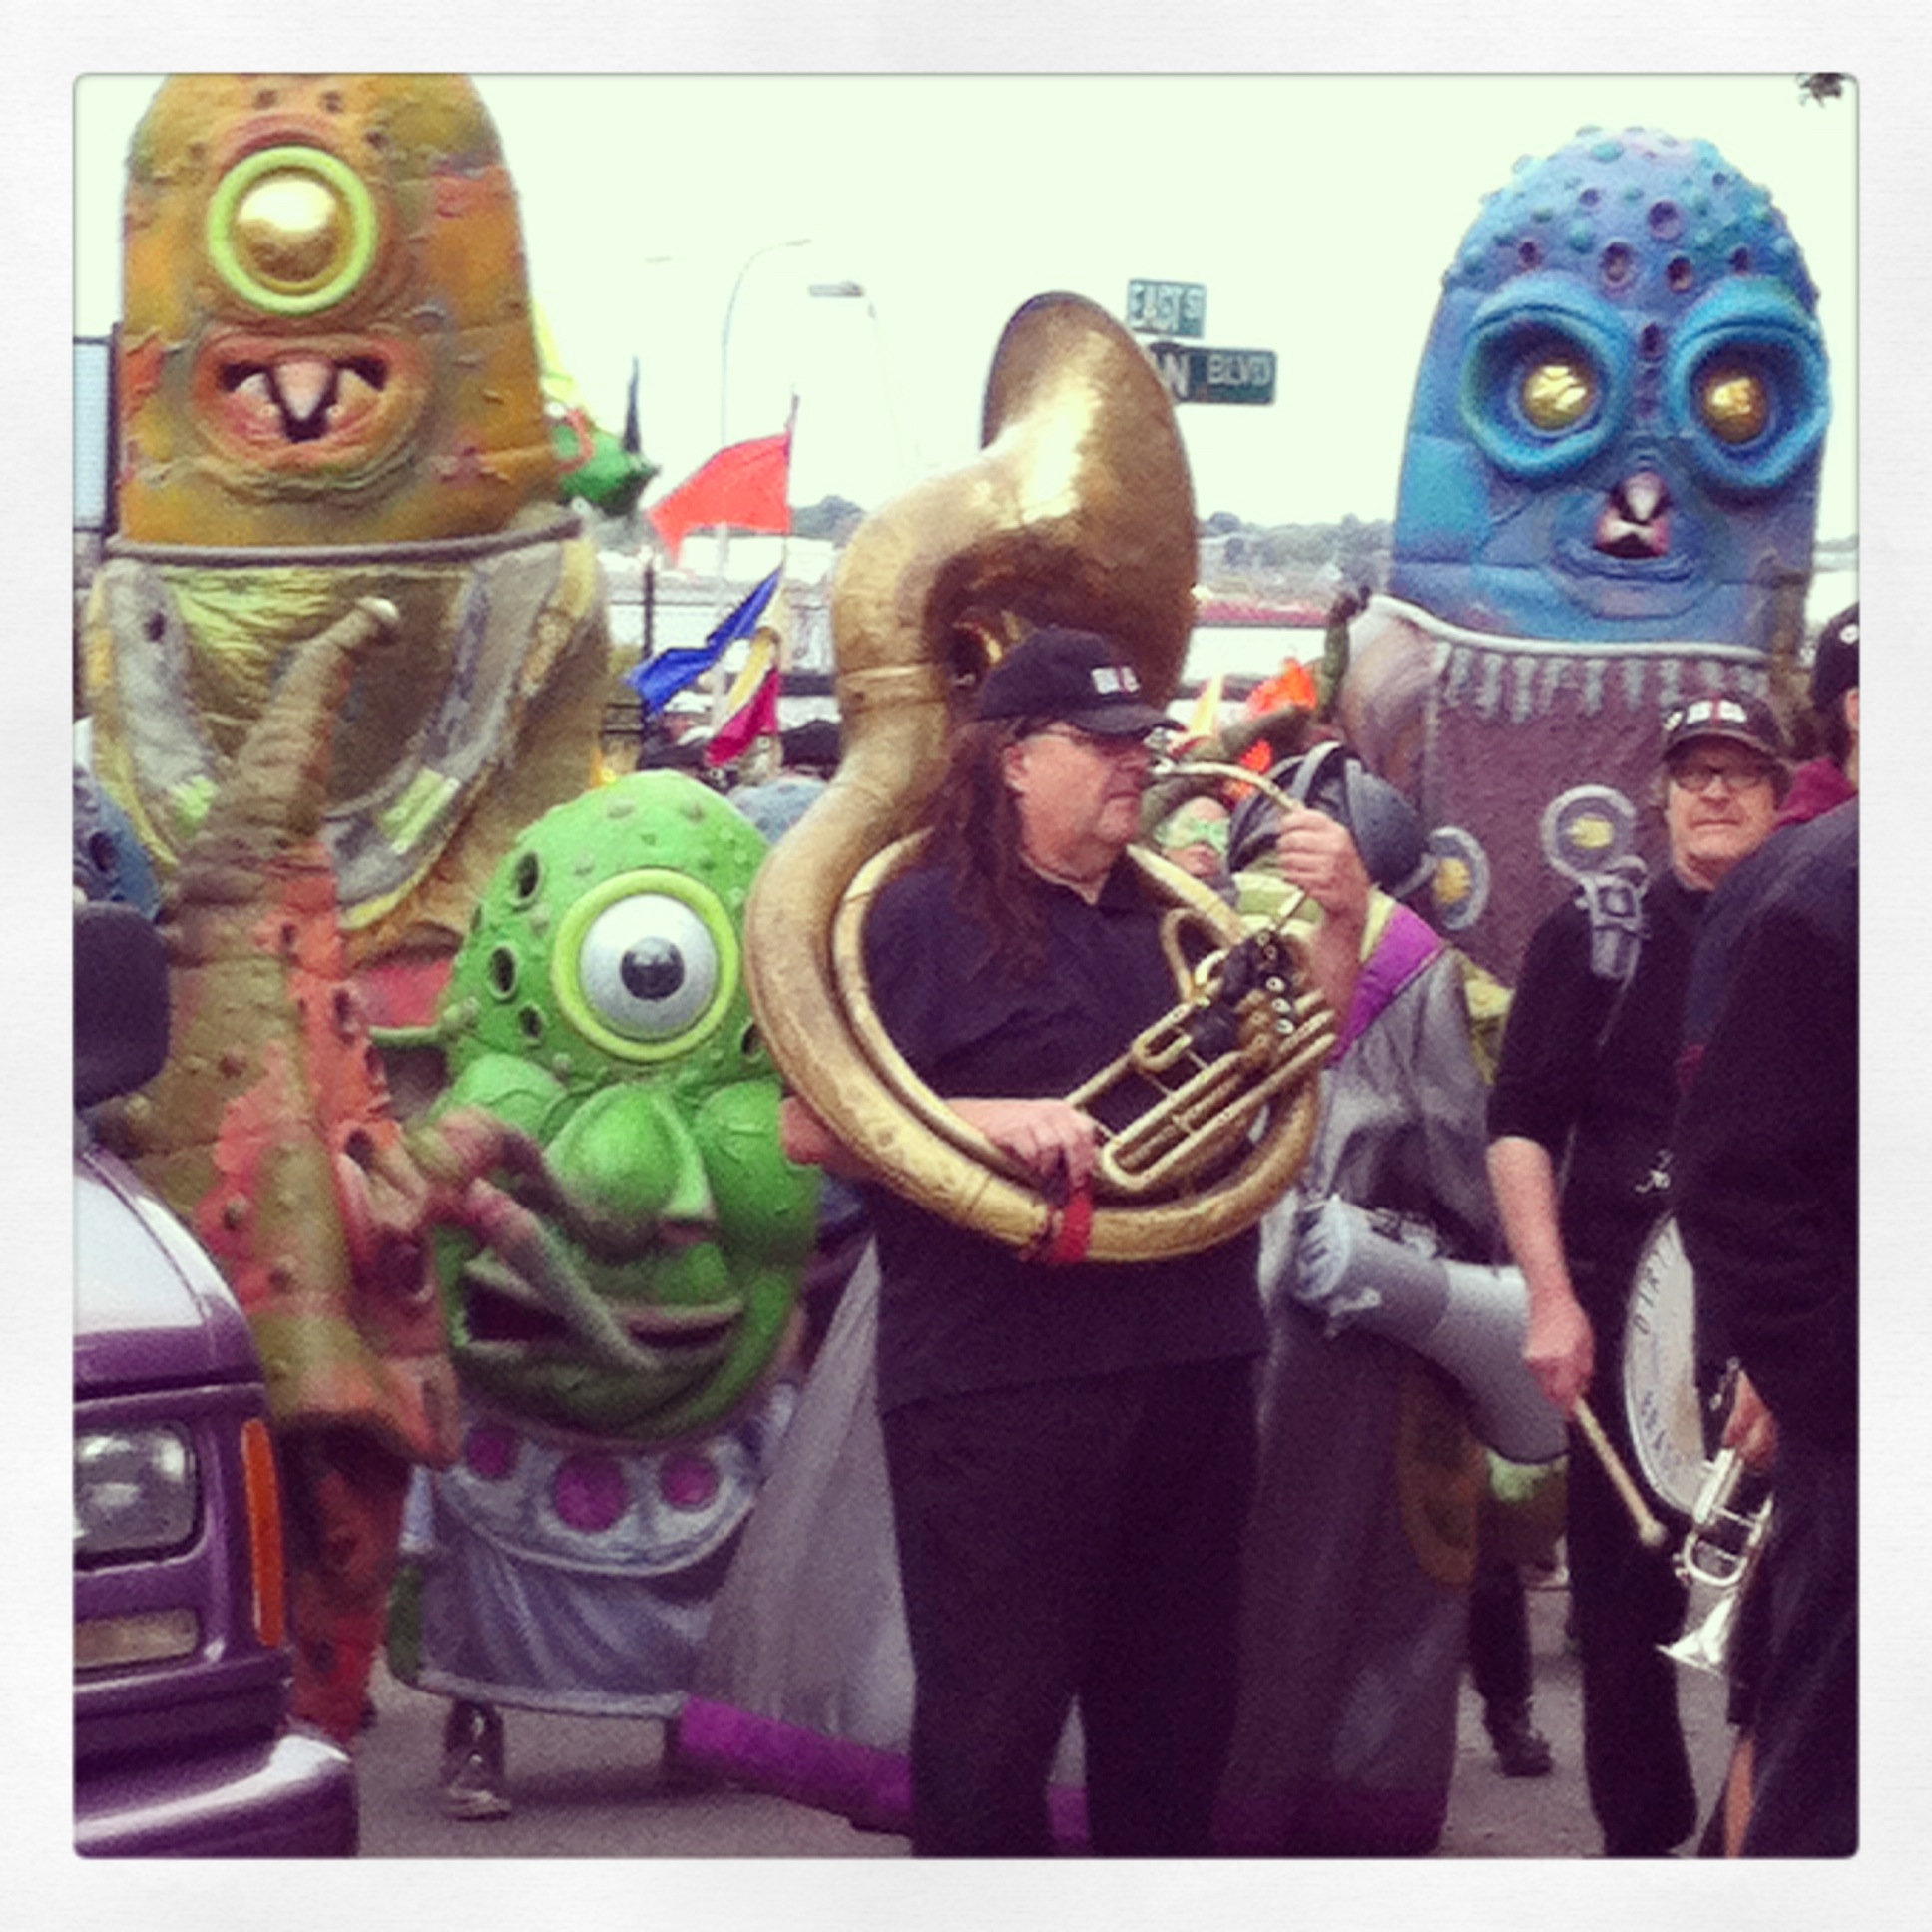 HONK & PRONK: Two days of Streetbands